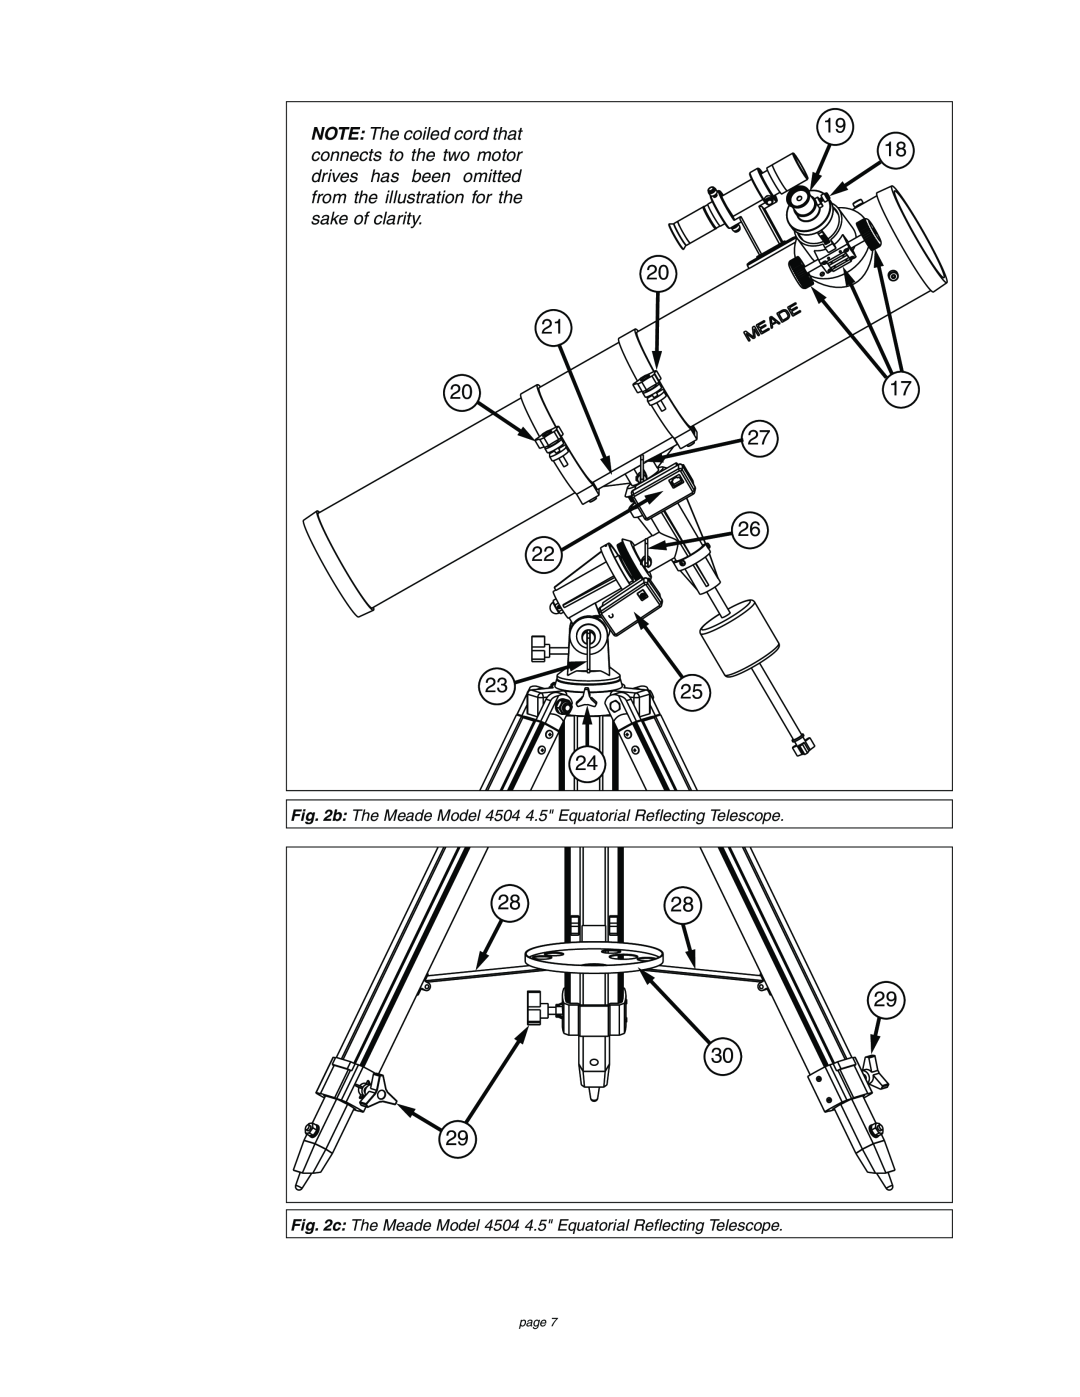 Meade instruction manual 2325, b The Meade Model 4504 4.5 Equatorial Reflecting Telescope, page 